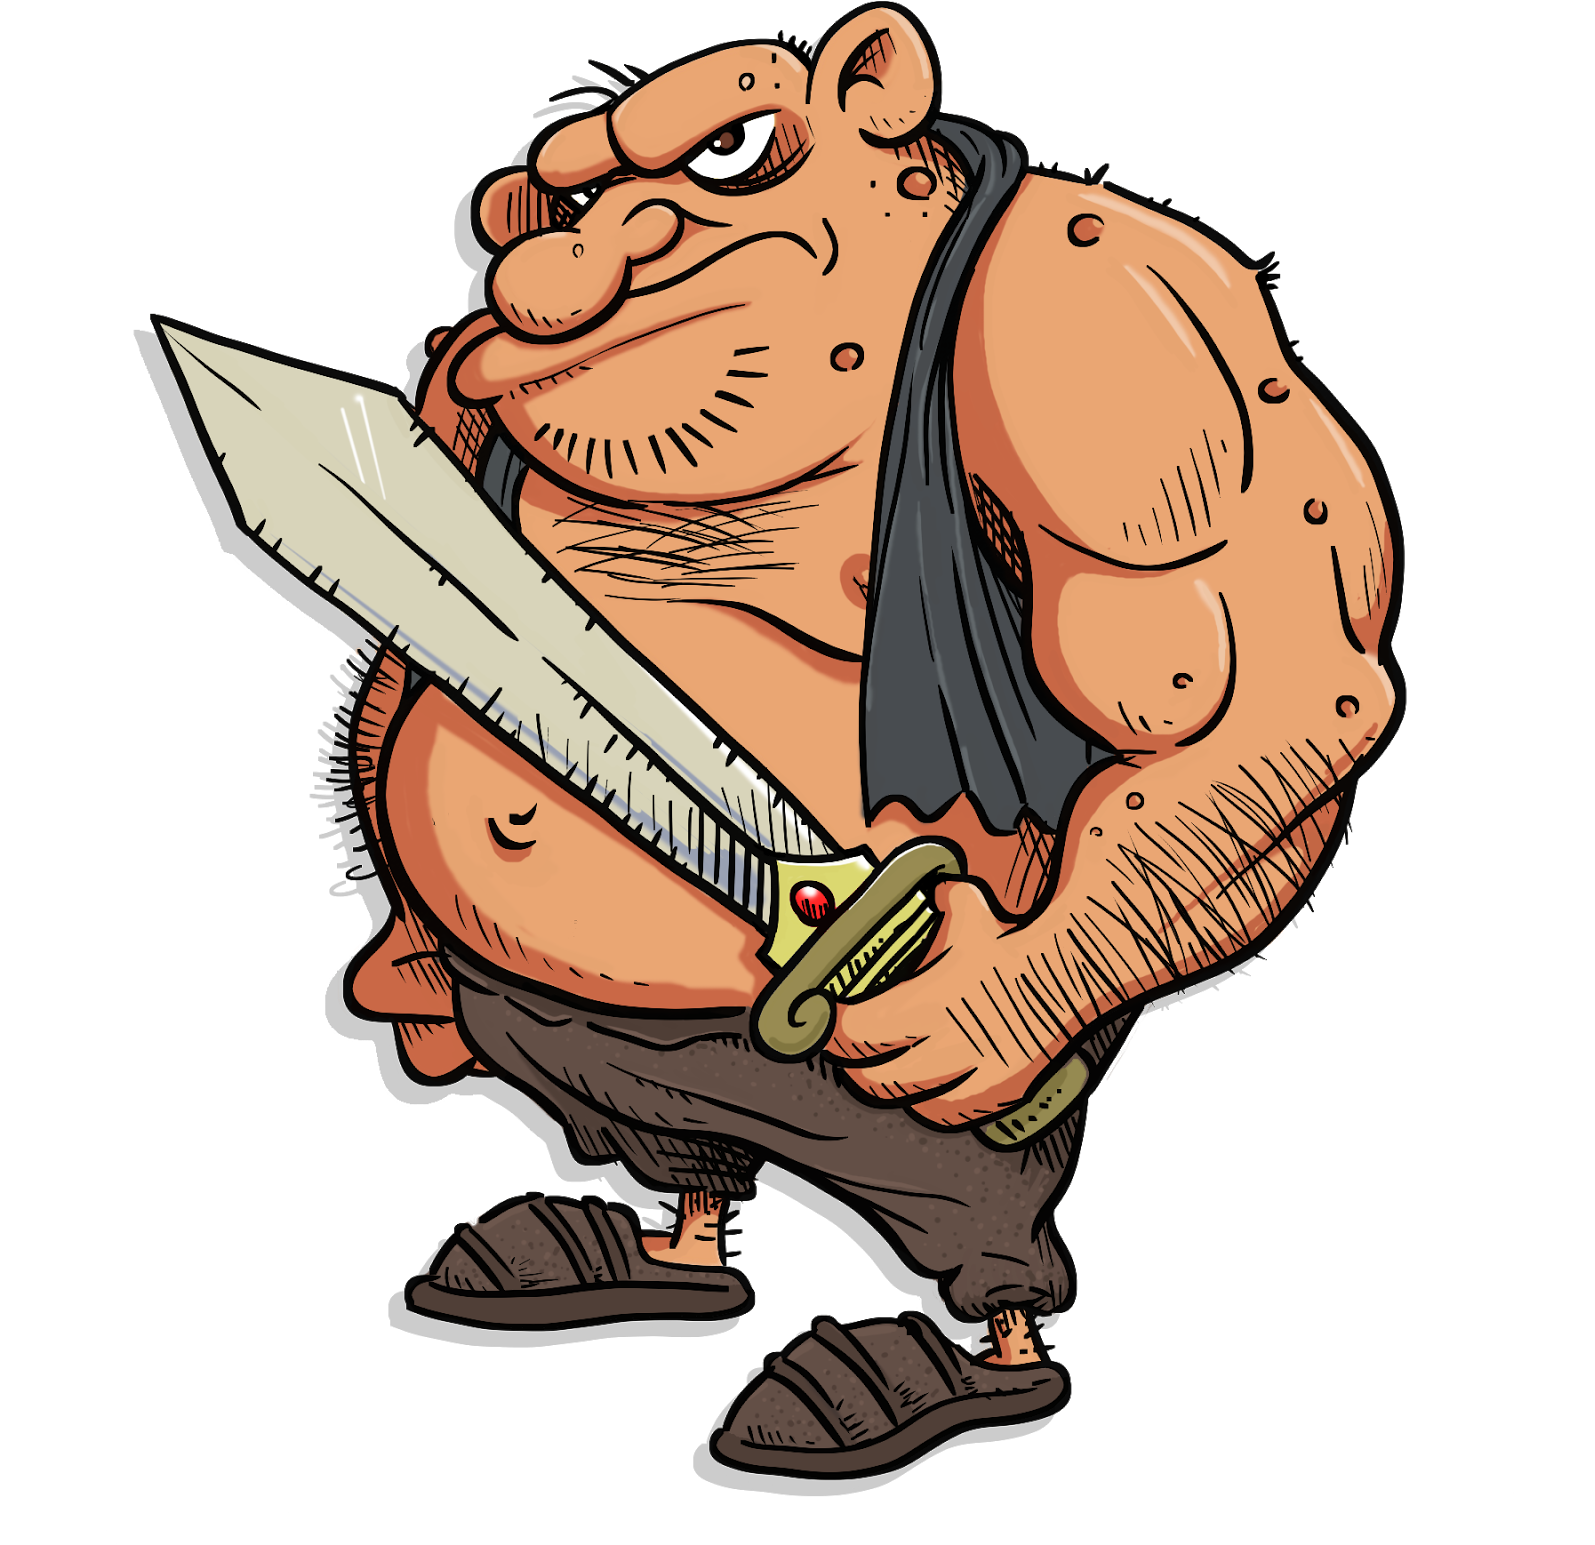 The Full Color Version Of The Ogre On A Dark Background - The Full Color Version Of The Ogre On A Dark Background (1600x1600)